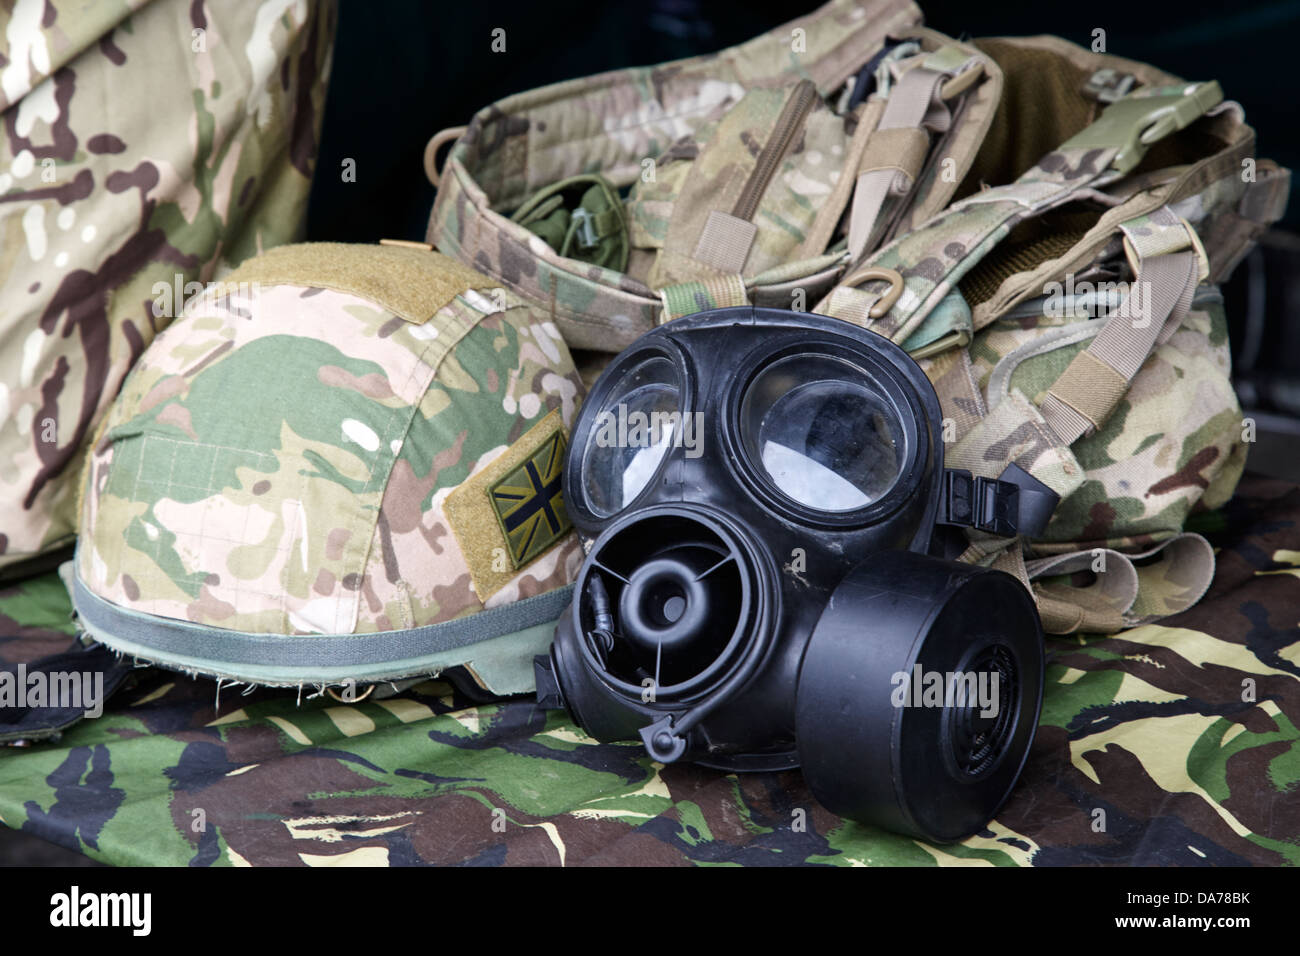 british army military equipment including helmet backpack and gas mask county down northern ireland uk Stock Photo